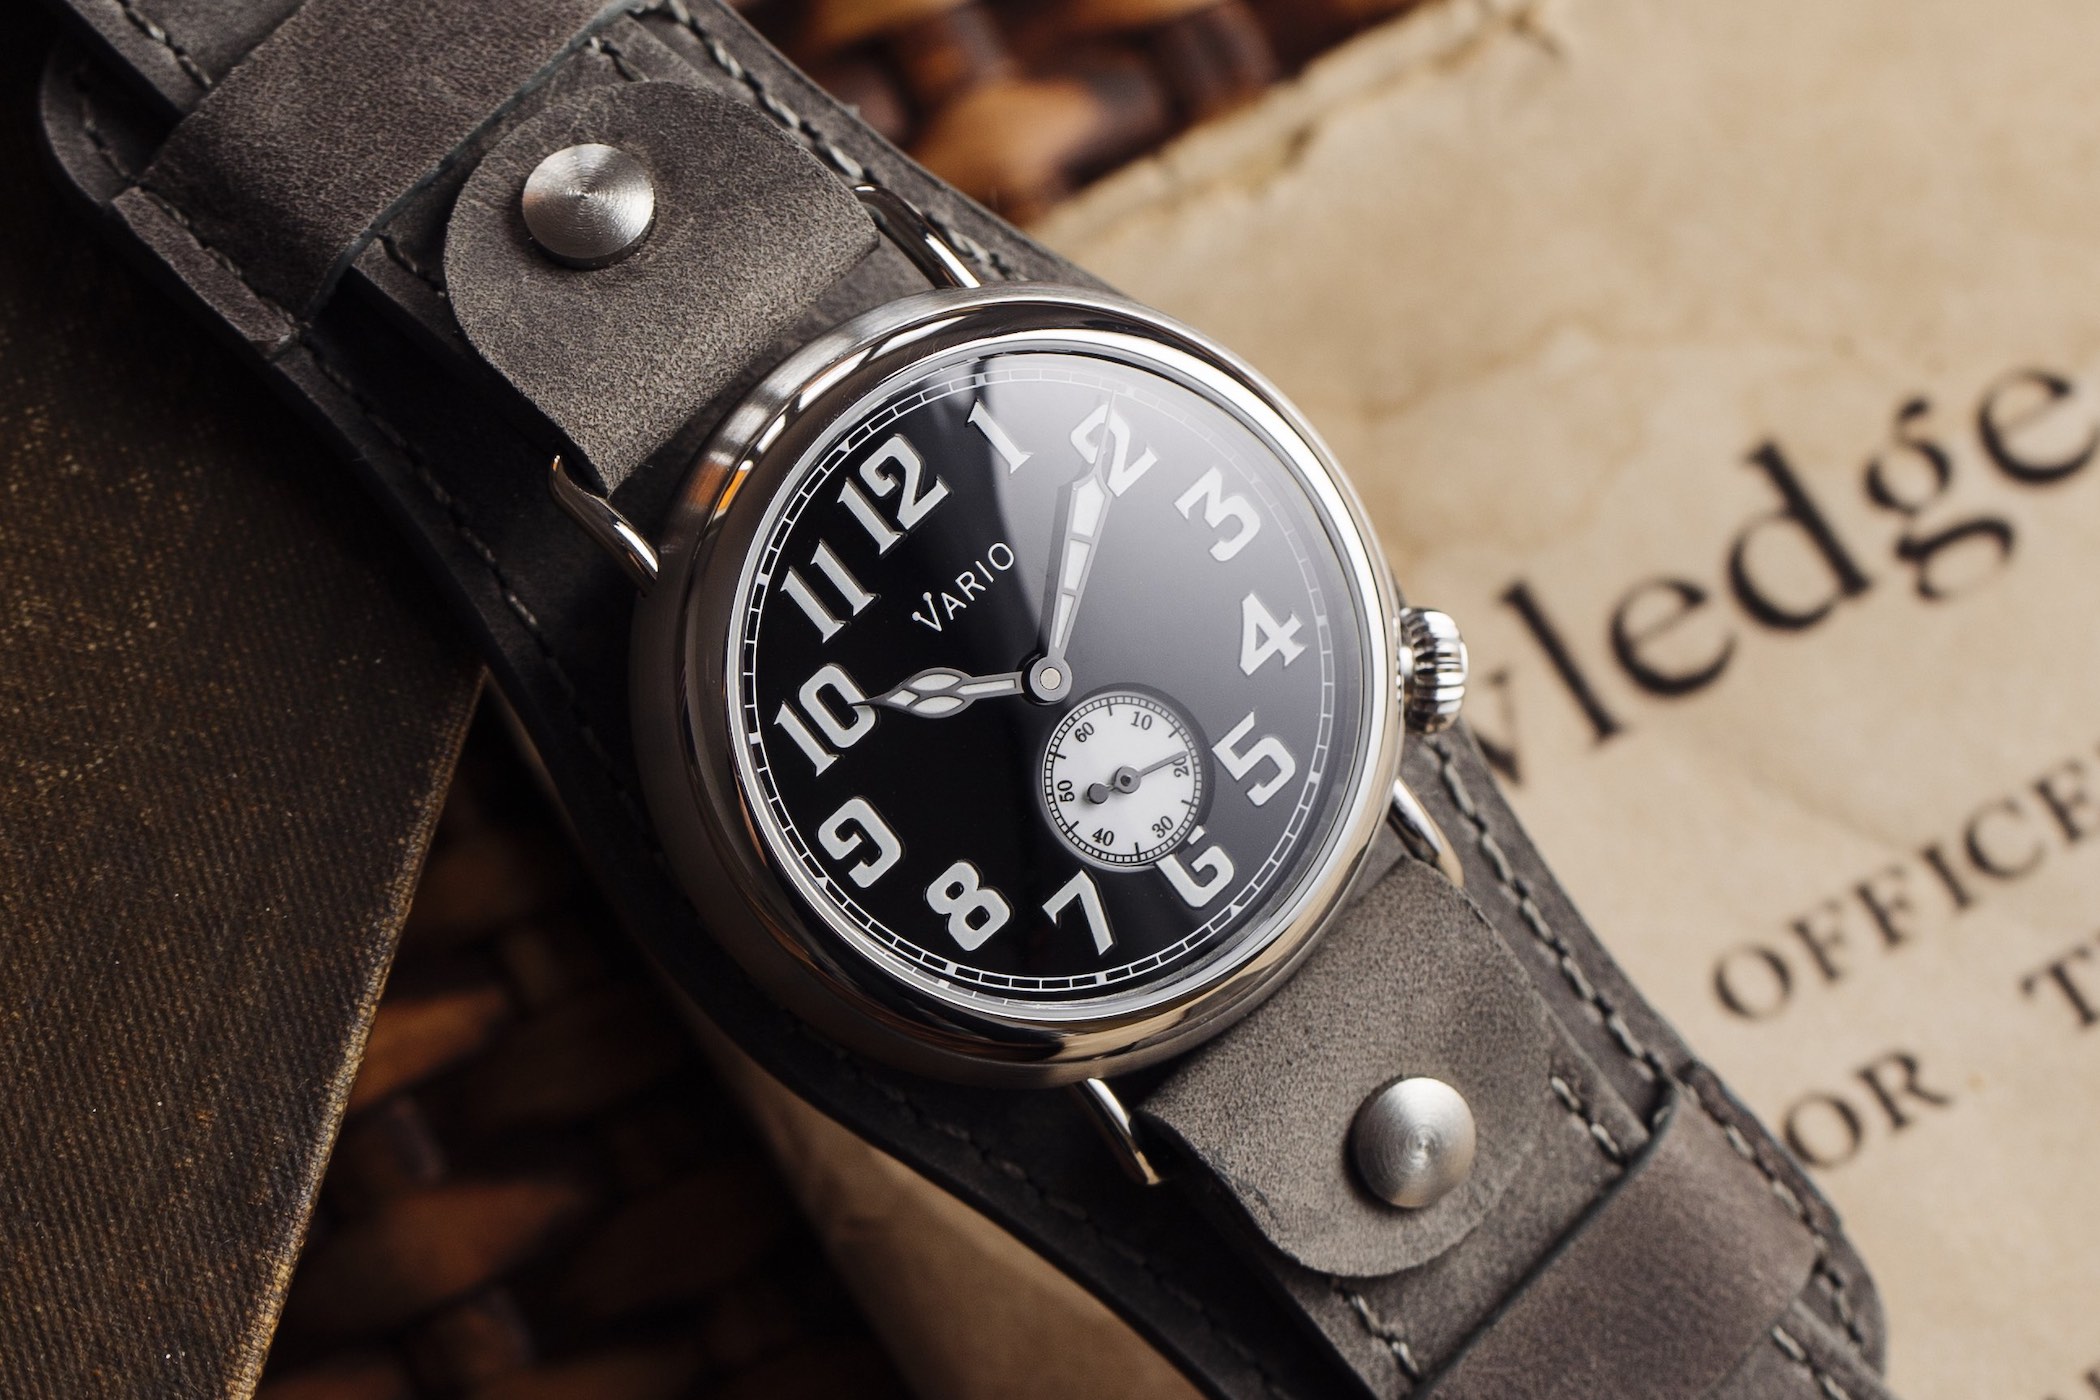 Vario WW1 Trench Watch